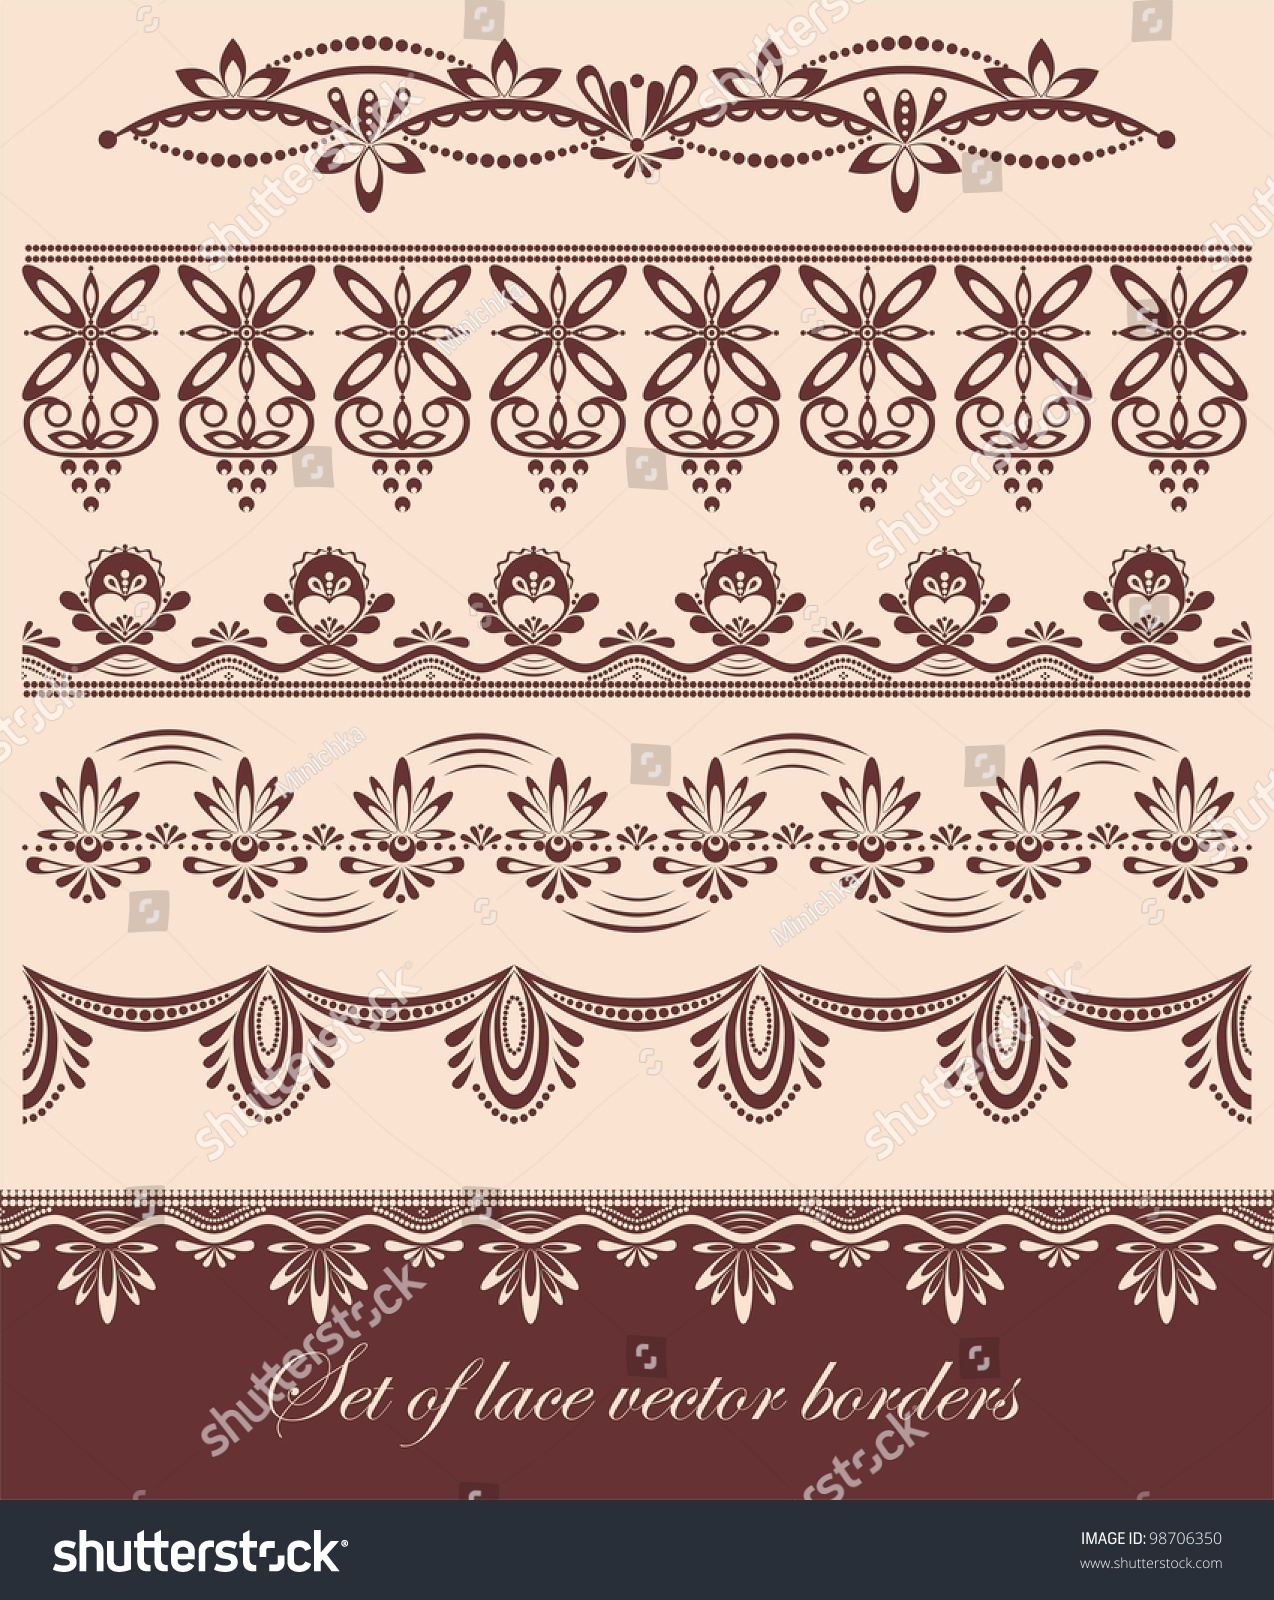 Set Of Lace Vector Borders - 98706350 : Shutterstock